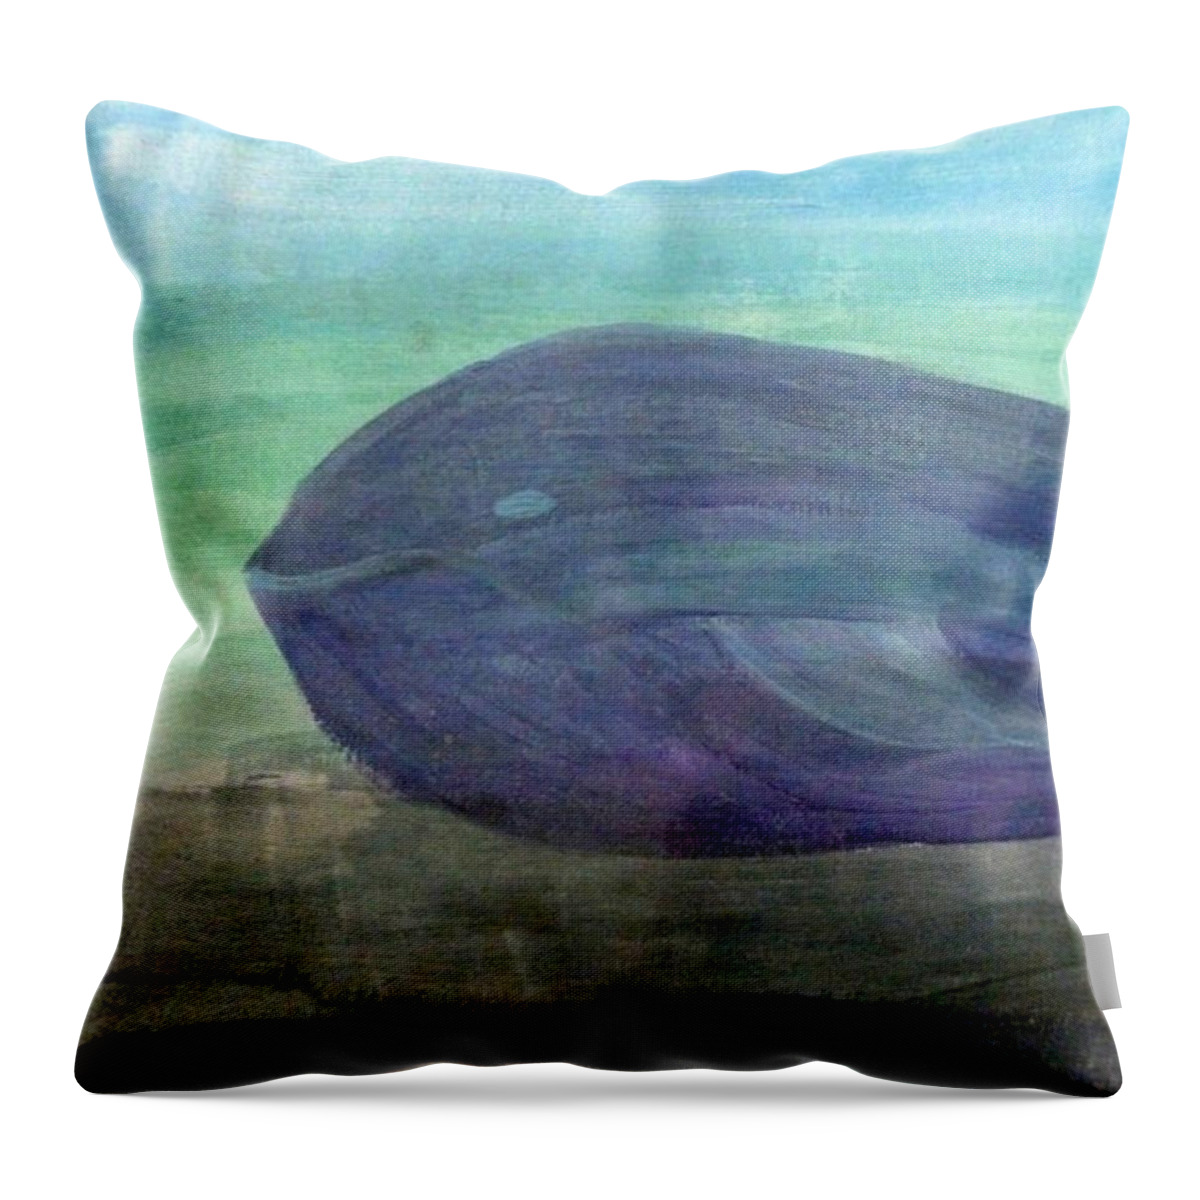 Ocean Throw Pillow featuring the painting Blue Whale by Francesca Mackenney